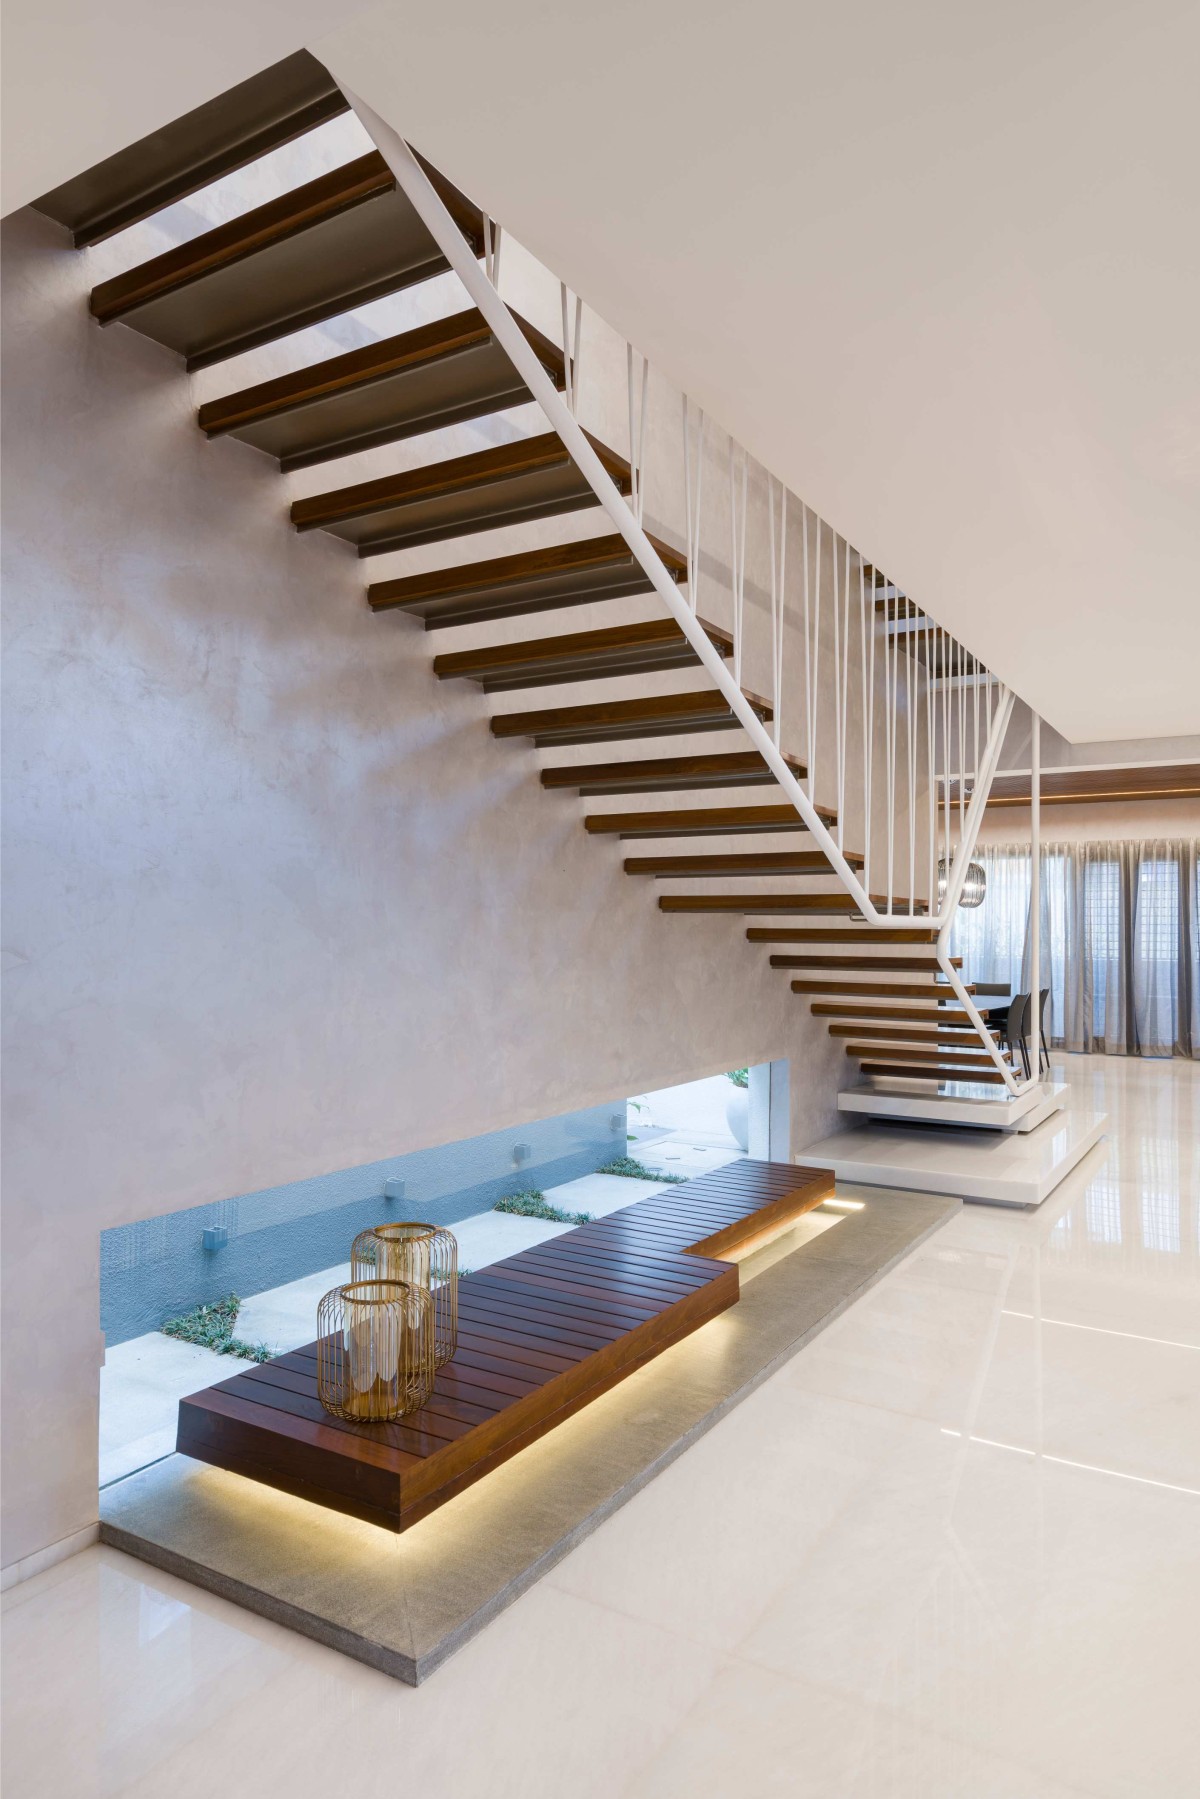 Staircase of Gauribidanur Residence by Cadence Architects